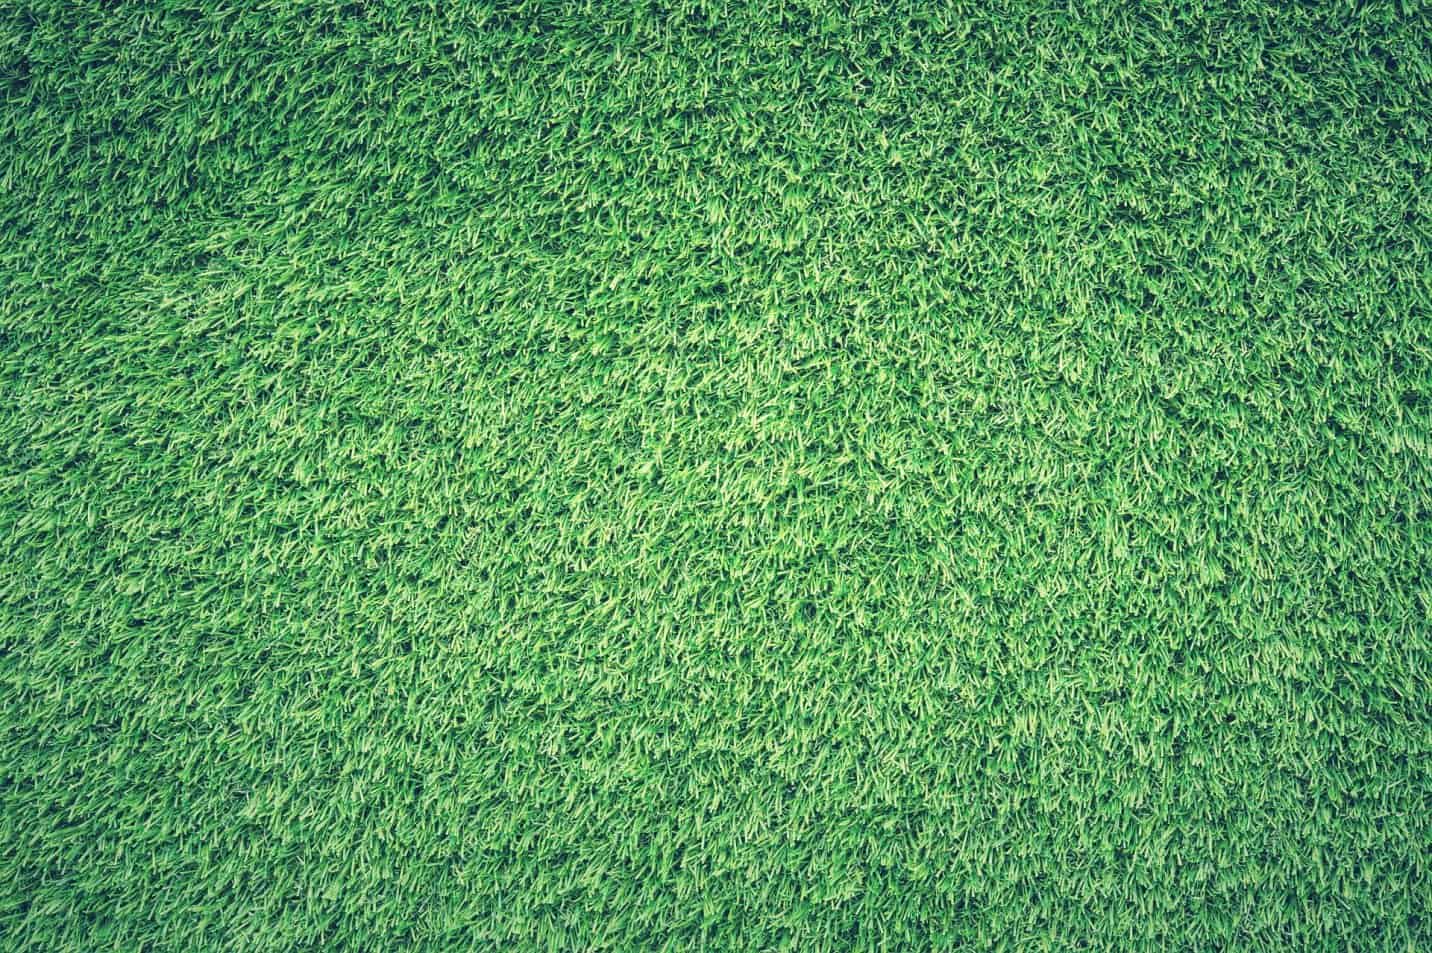 Artificial Turf and Your Health